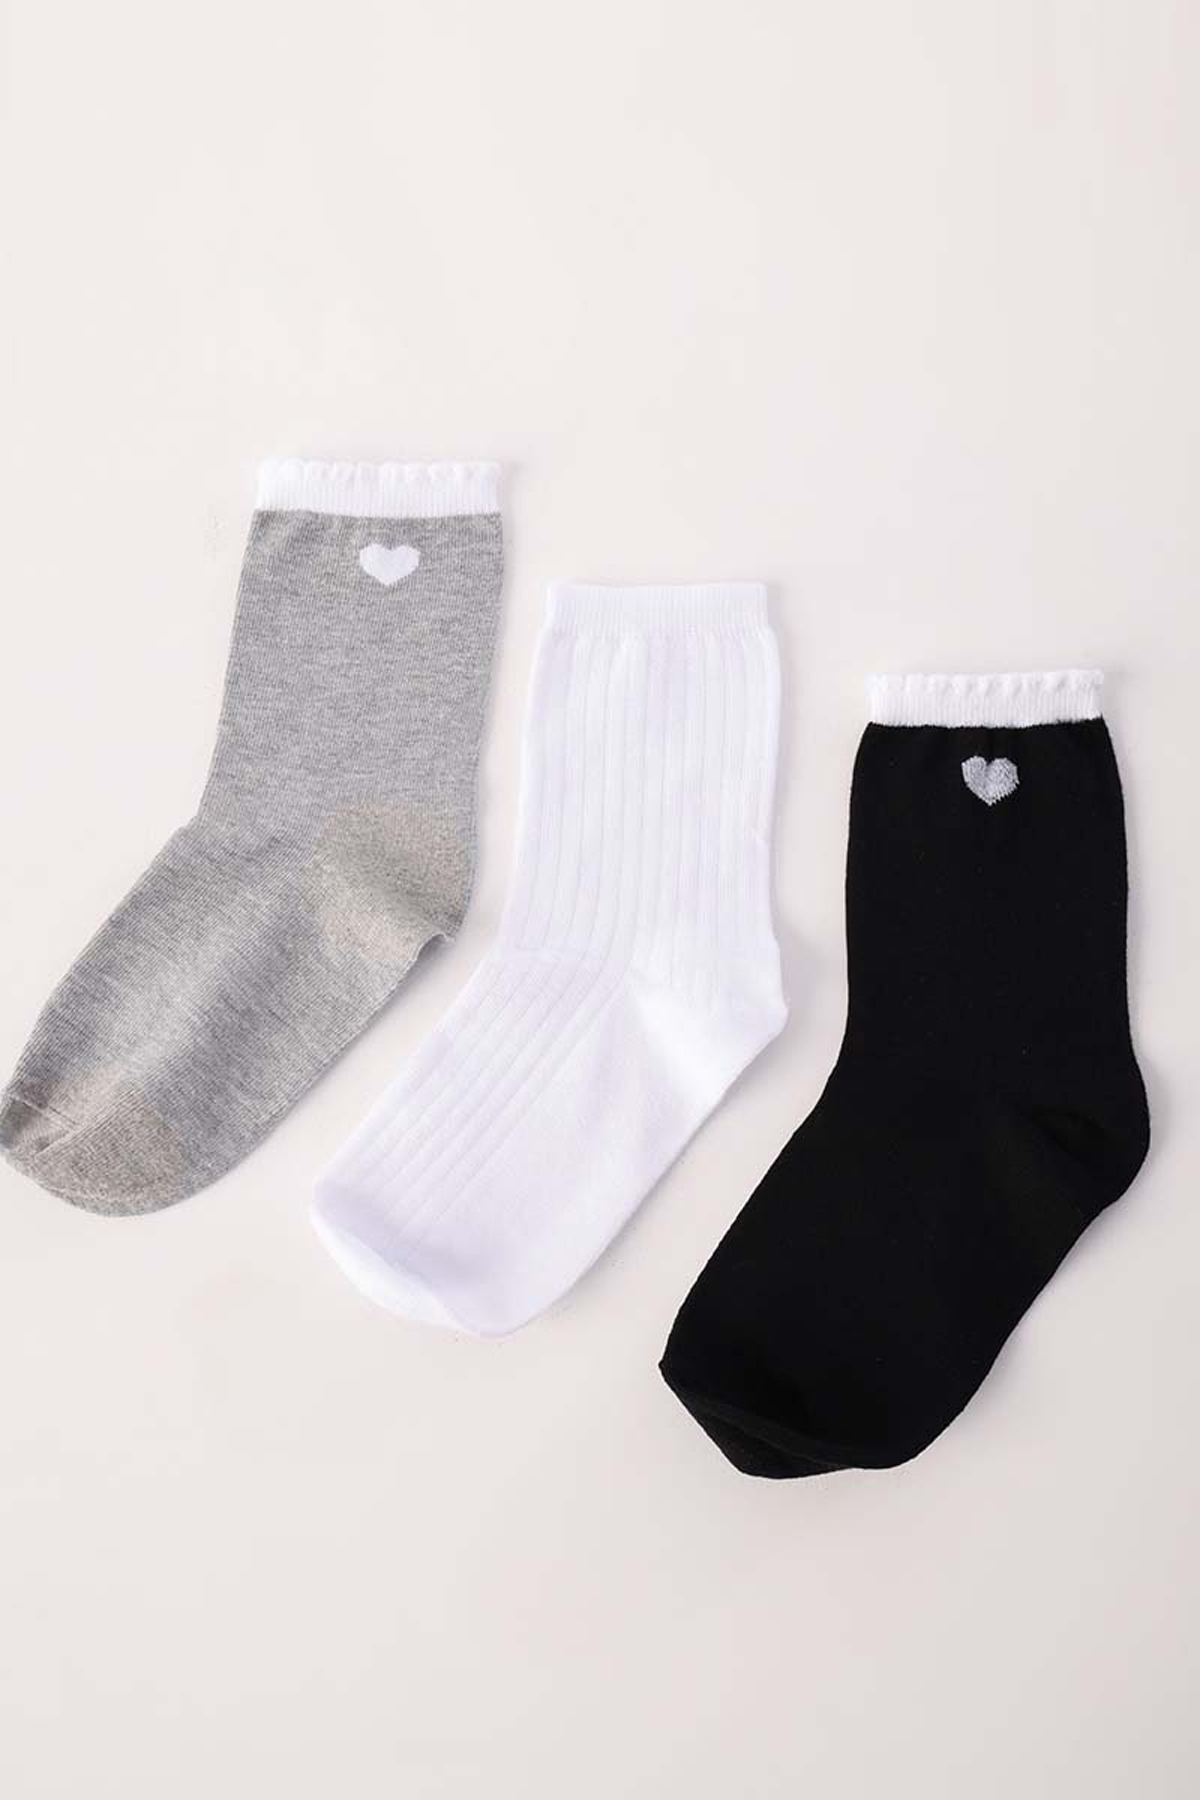 A wholesale clothing model wears all12245-set-of-3-socks-black-&-white-&-gray, Turkish wholesale Socks of Allday